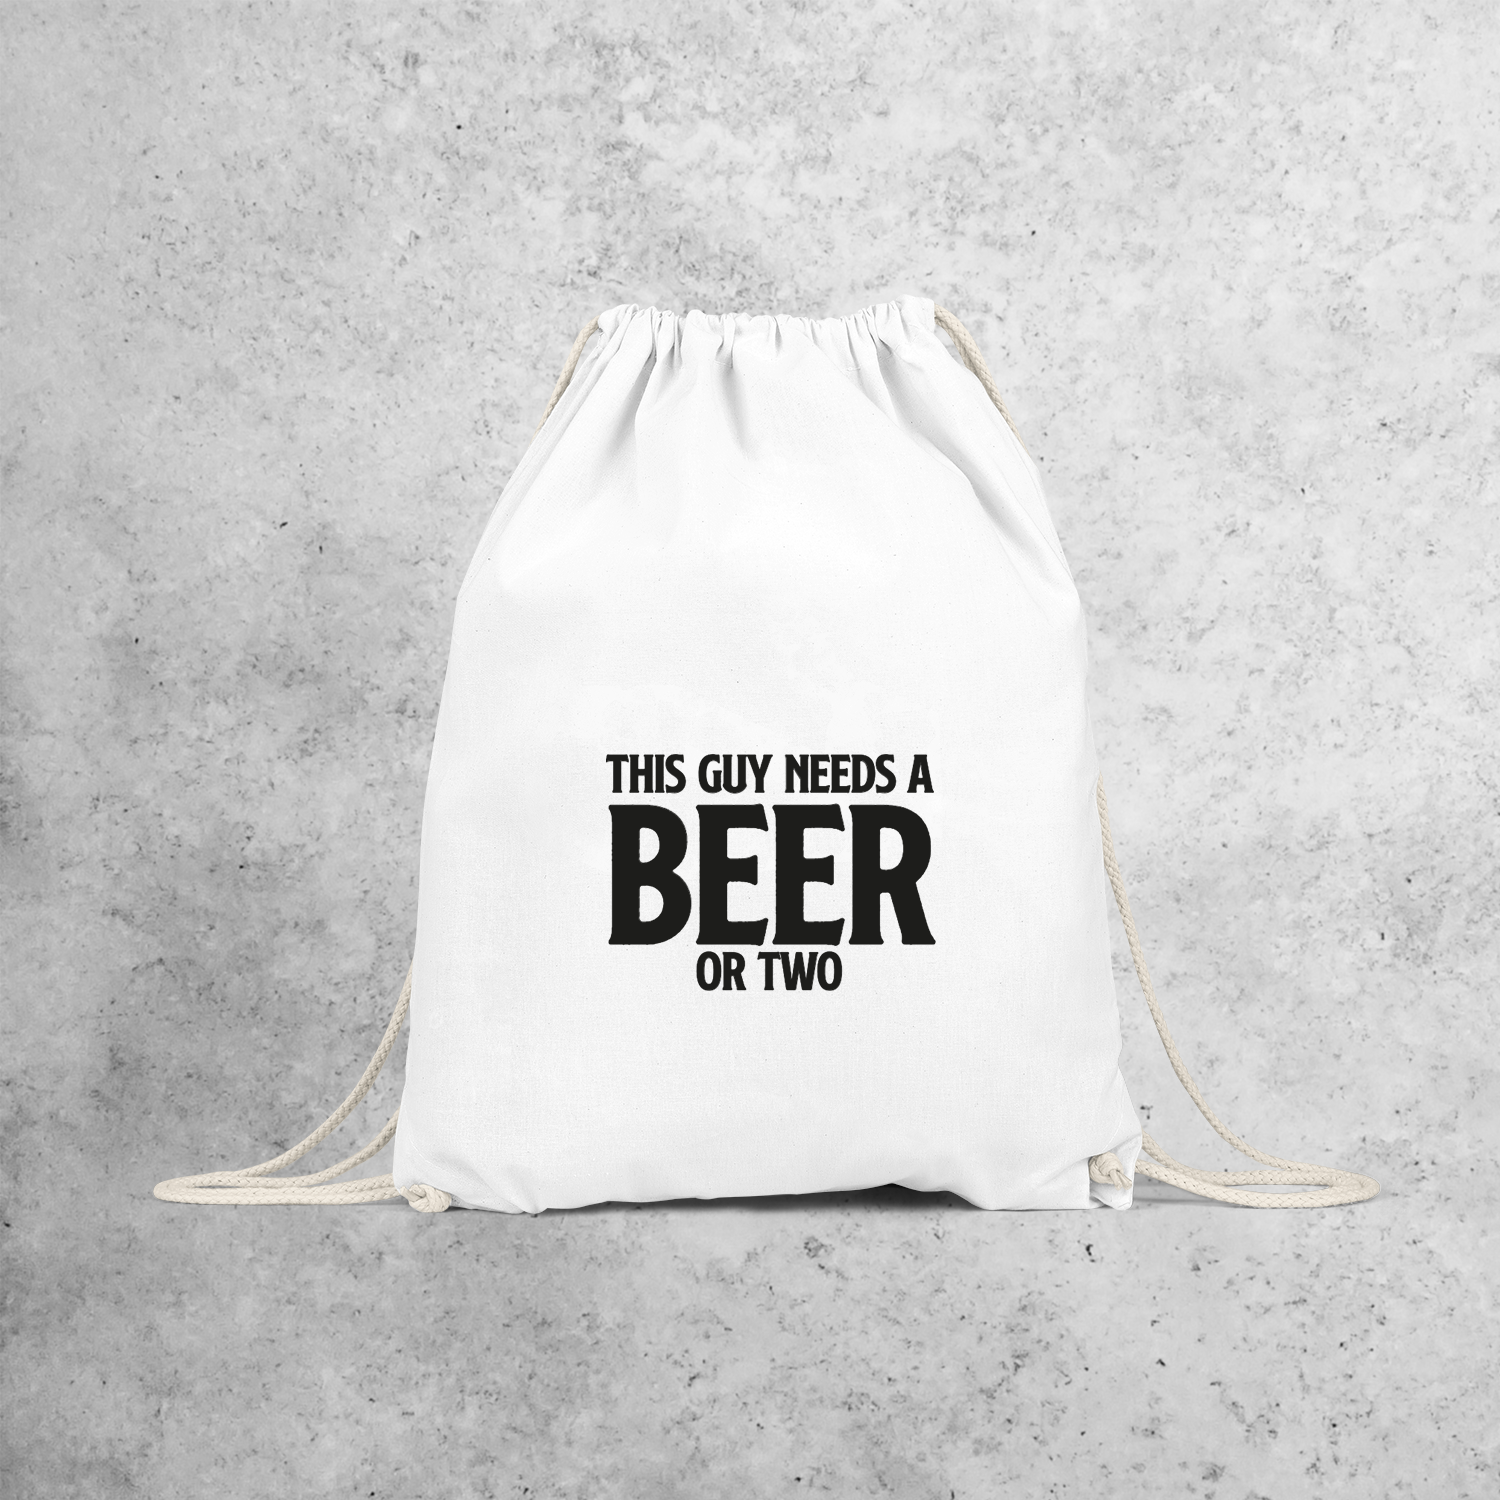 'This guy needs a beer or two' backpack